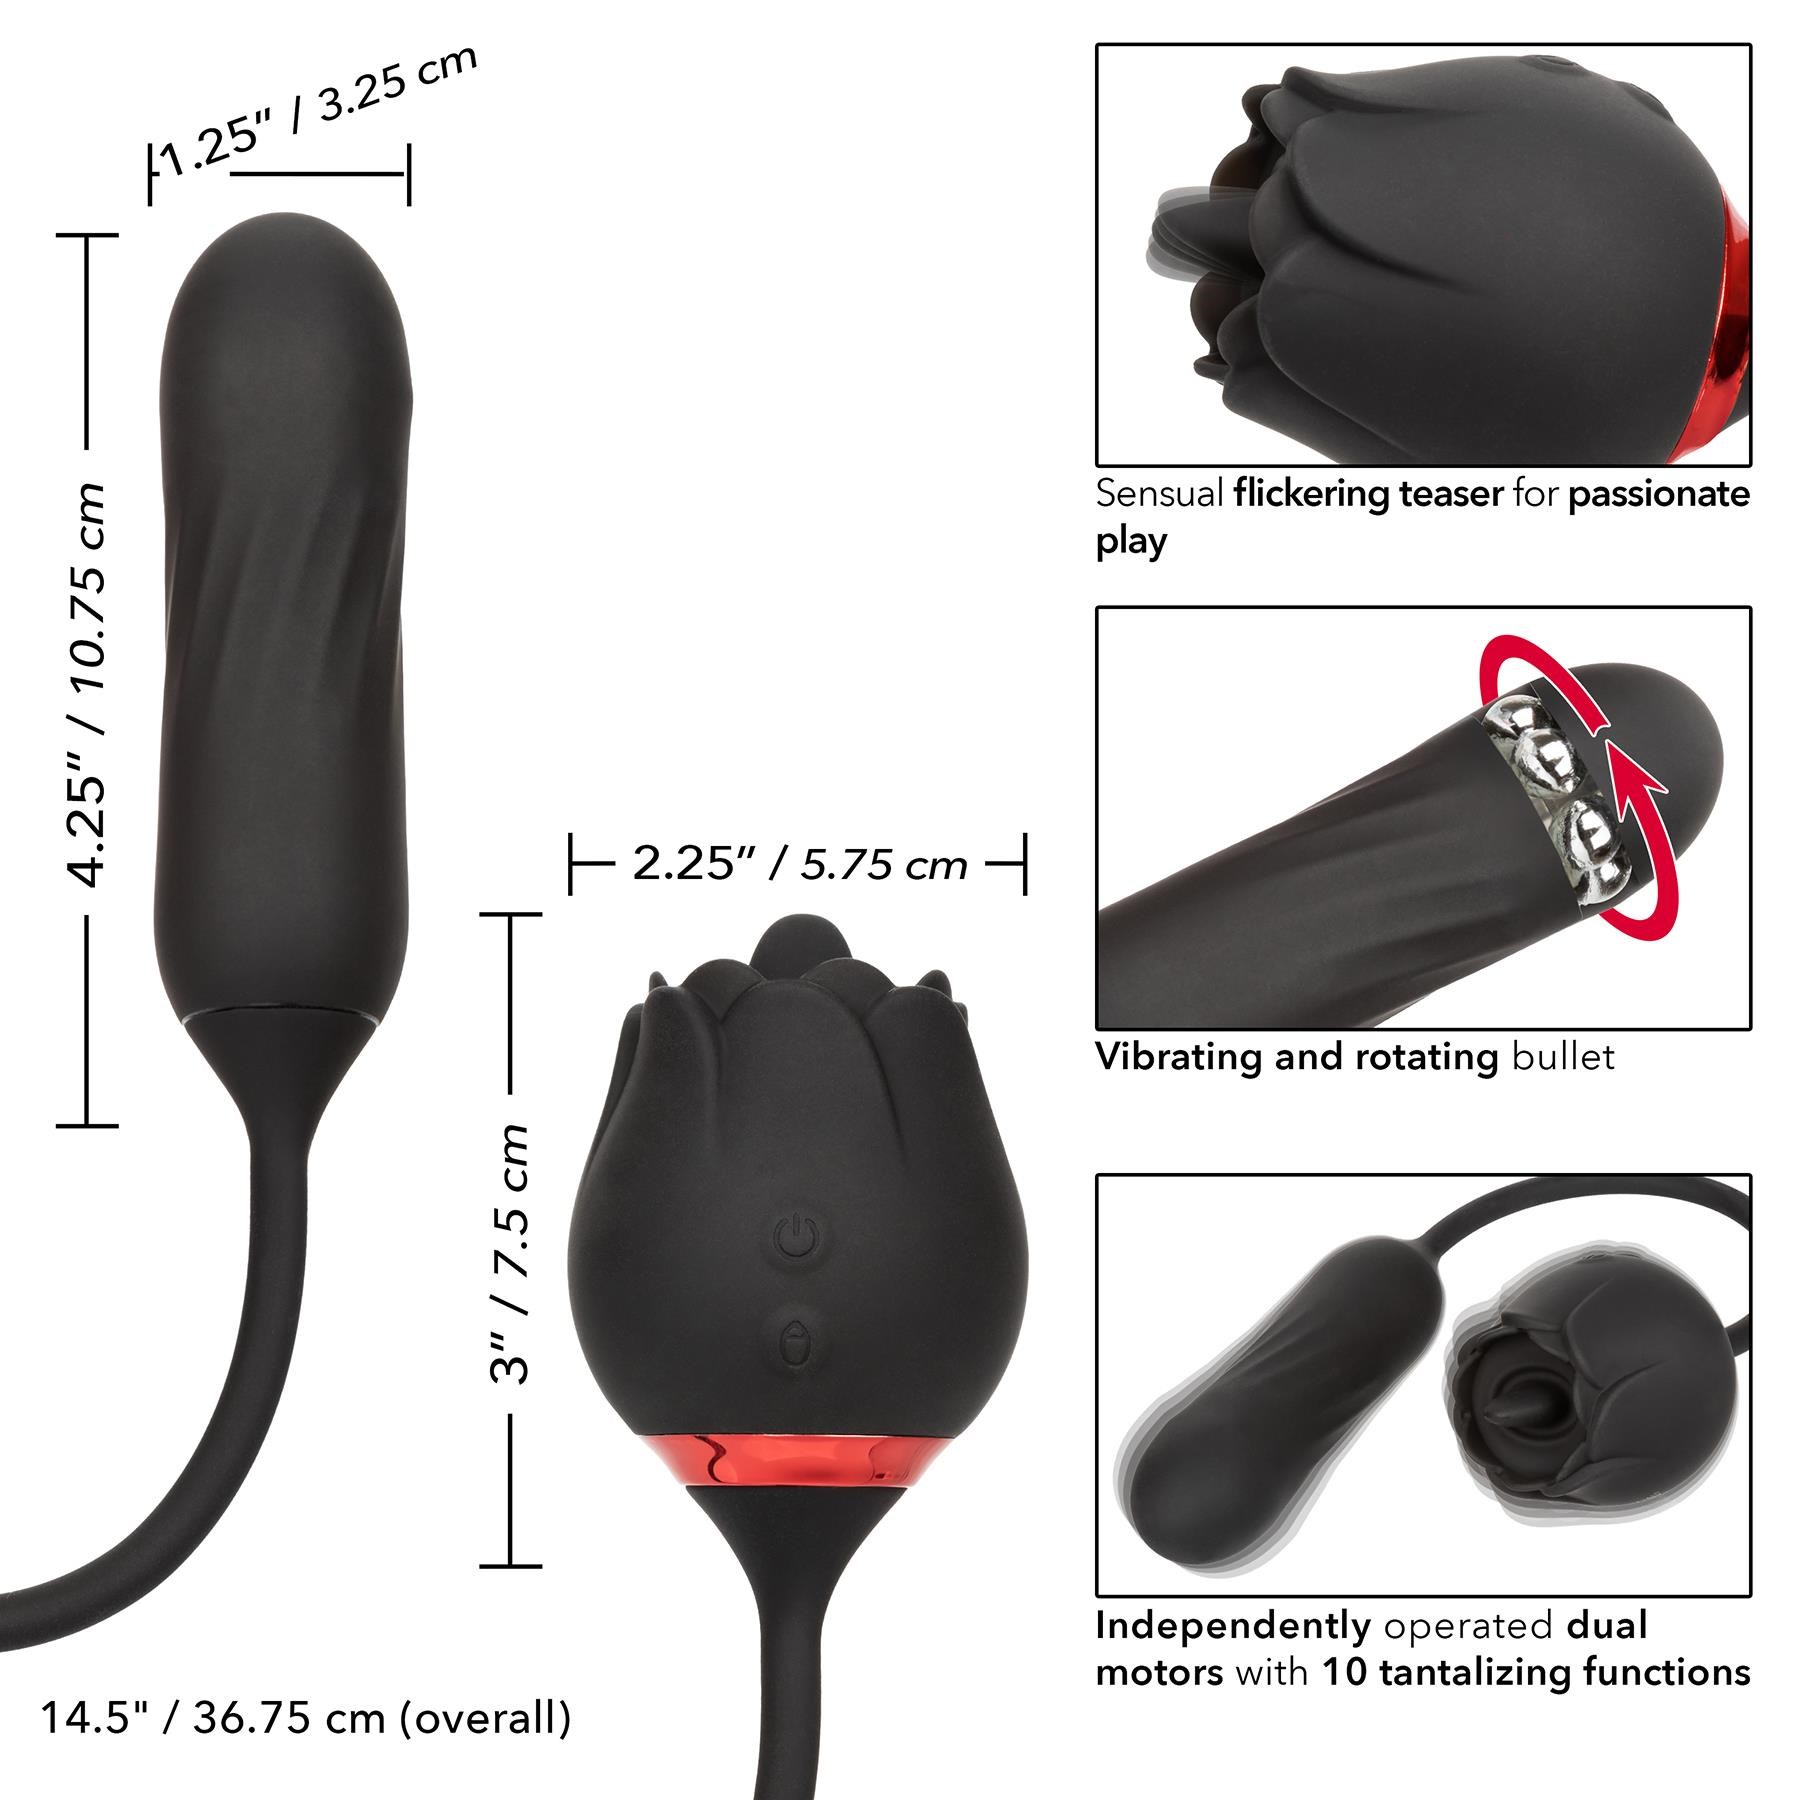 French Kiss Elite Lover Clitorial and Rotating Anal Vibrator - Instructions and Dimensions